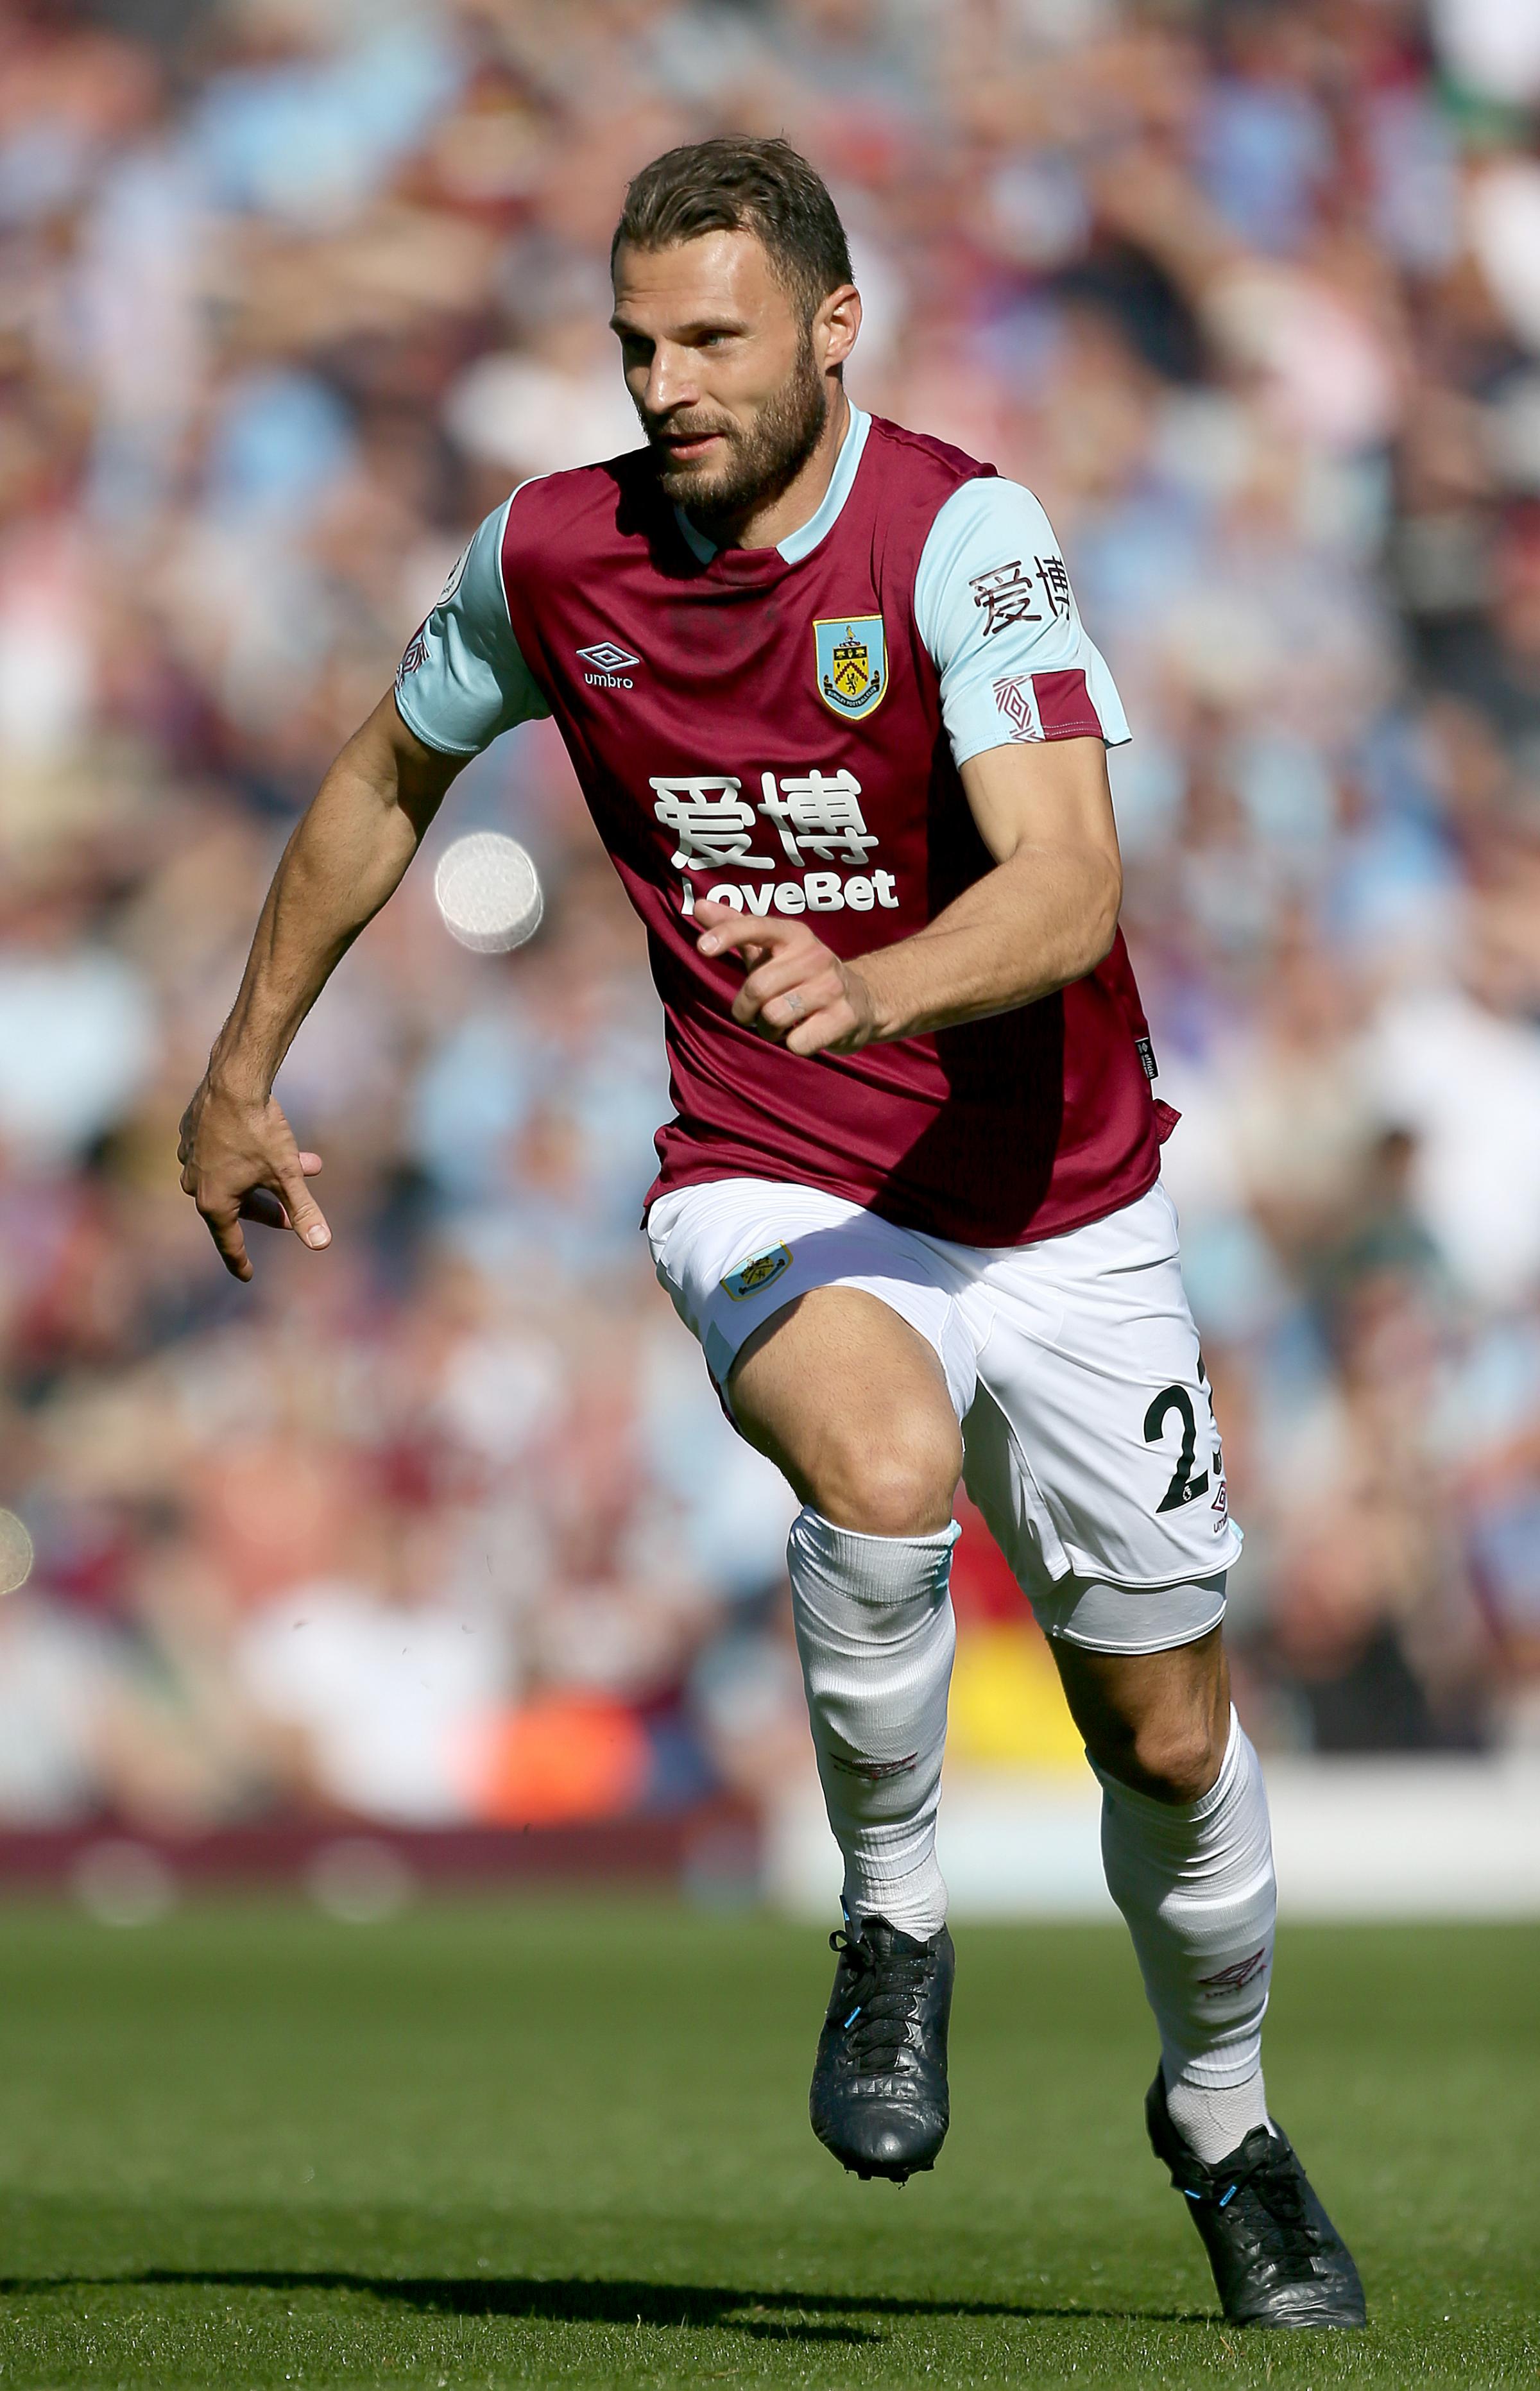 Cherries told Burnley their own player was banned ahead of FA Cup contest